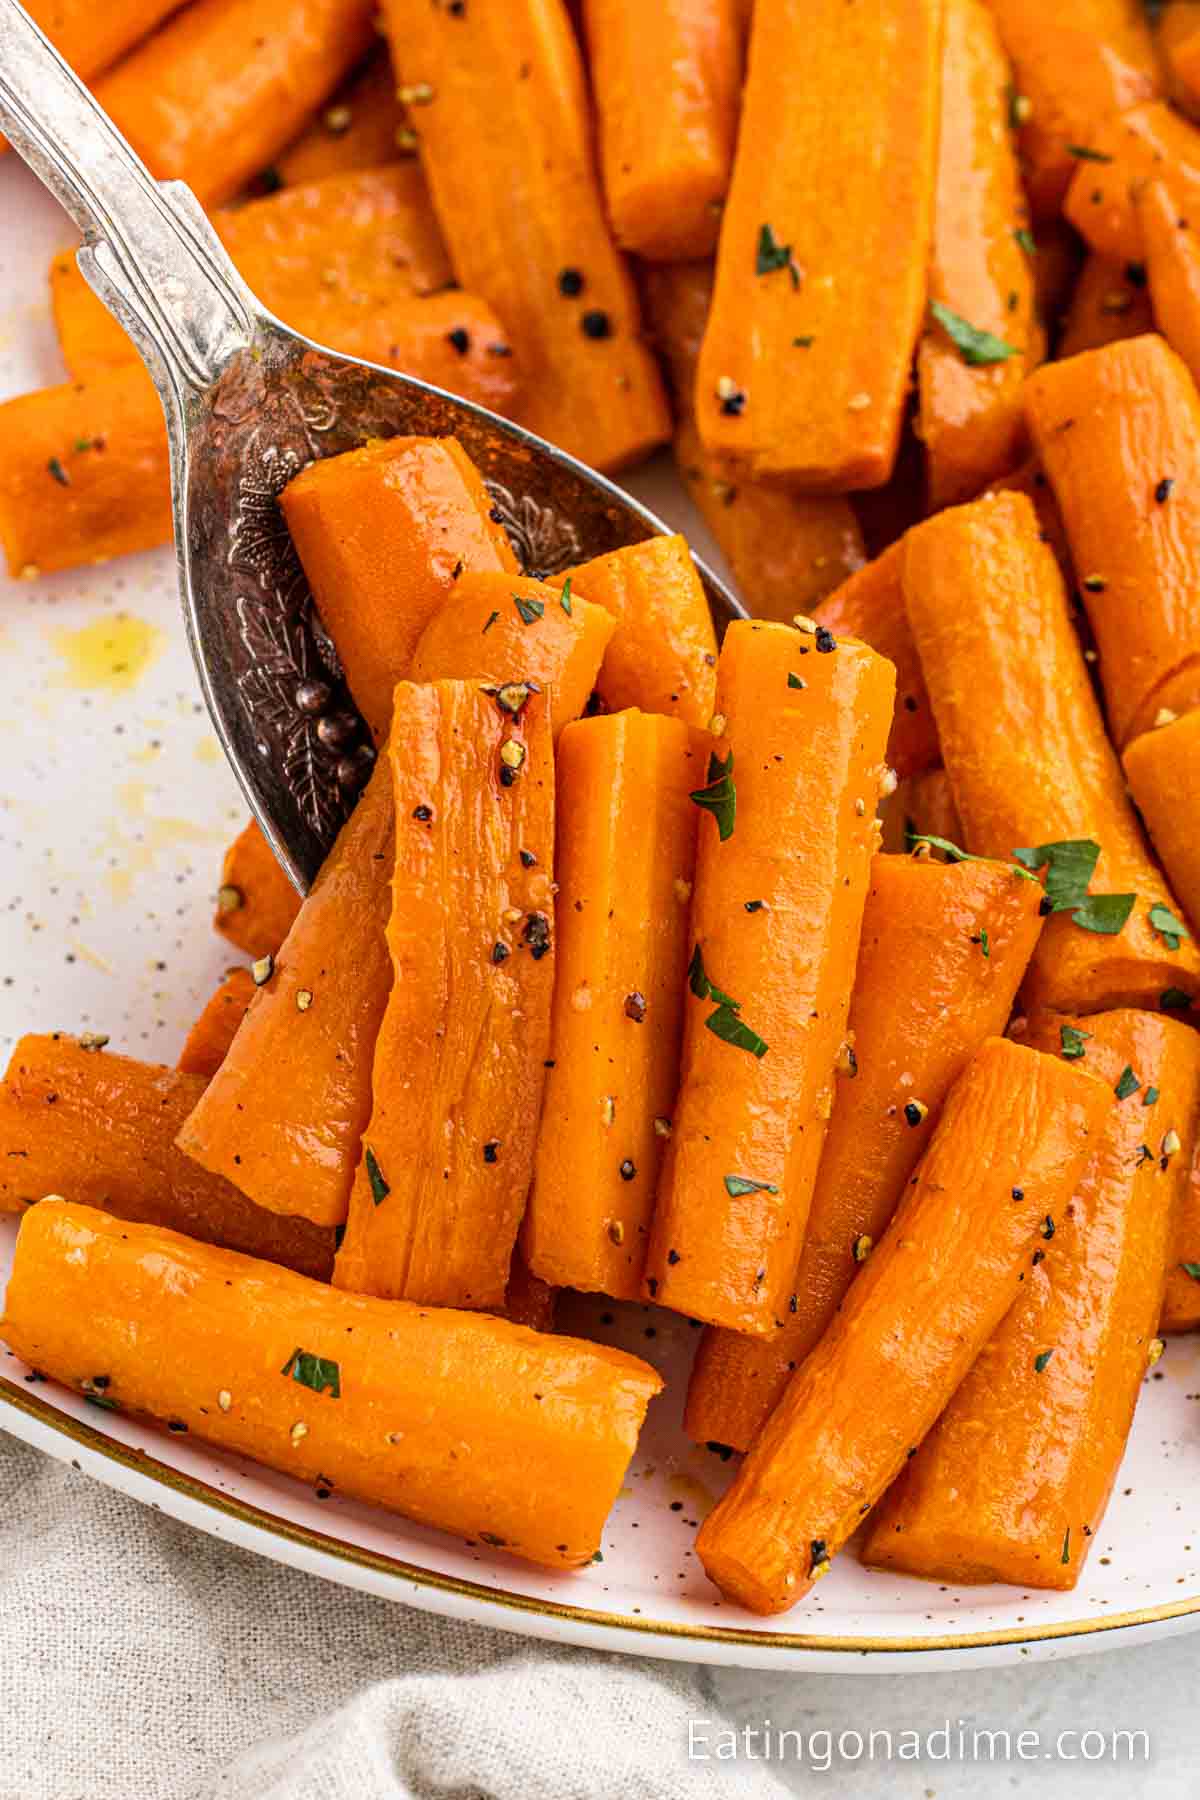 Roasted carrots on a baking sheet with a serving on a spoon